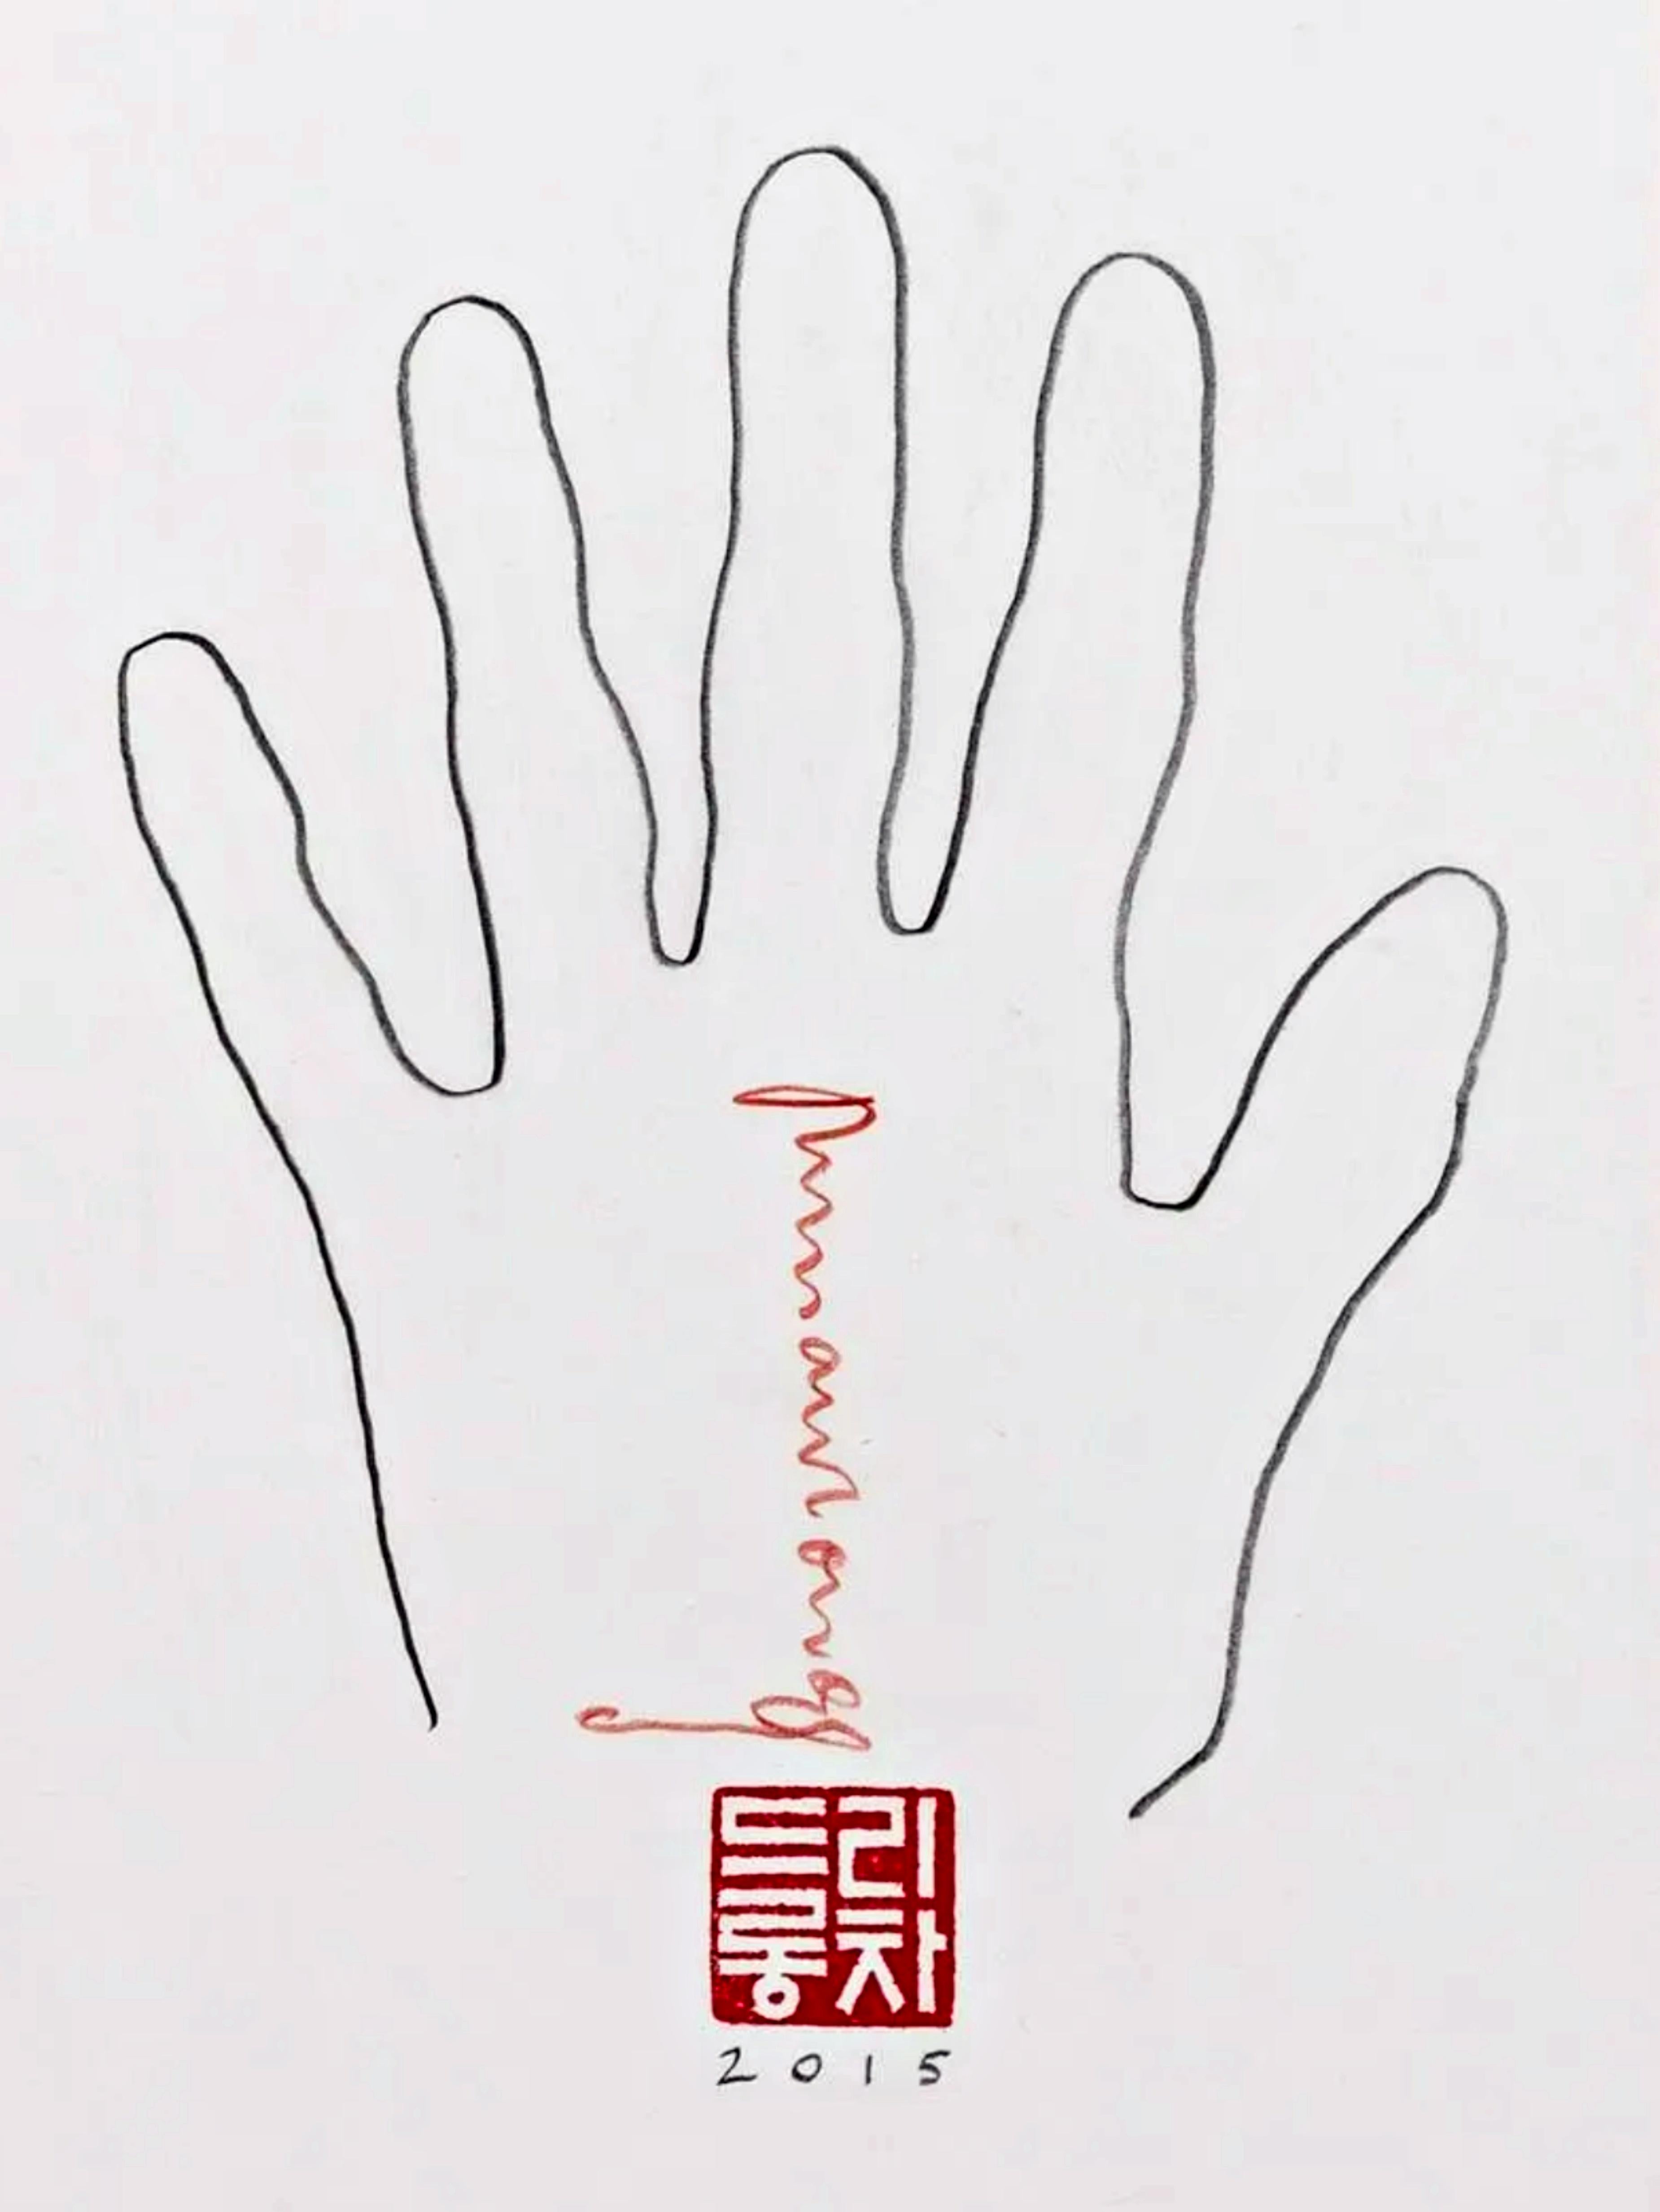 RICHARD LONG
Untitled (Artist's Hand), 2015
Graphite pencil on paper with red ink and monogram
Hand signed in red ink, dated in pencil, stamped with the artist's monogram
Unique
Original drawing, hand signed recto
Hand signed in red ink, dated in